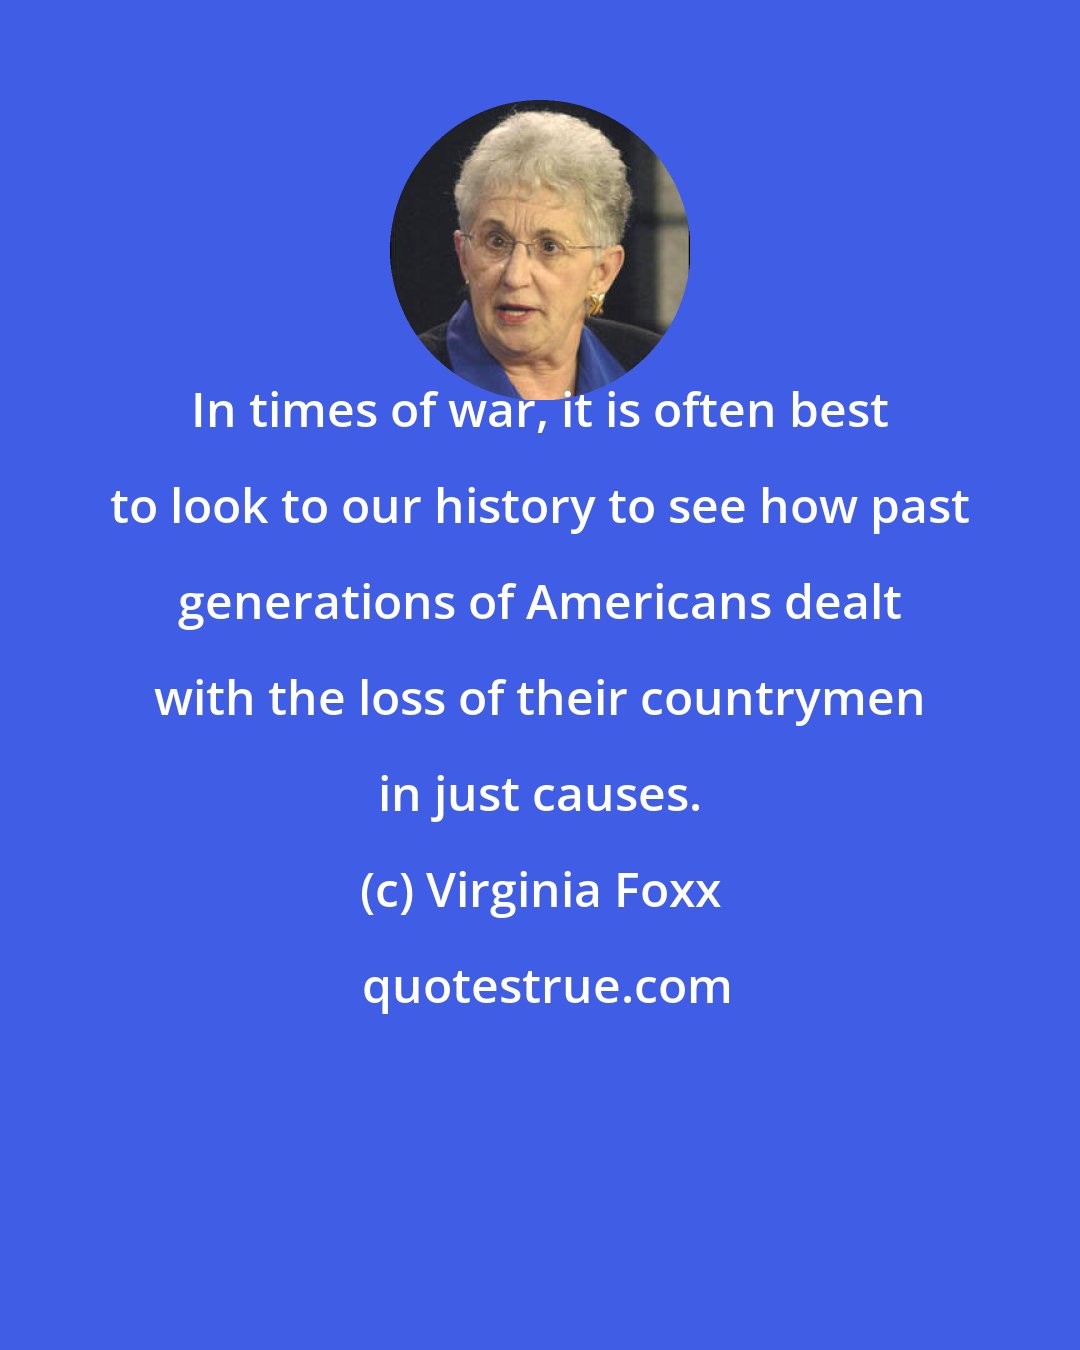 Virginia Foxx: In times of war, it is often best to look to our history to see how past generations of Americans dealt with the loss of their countrymen in just causes.